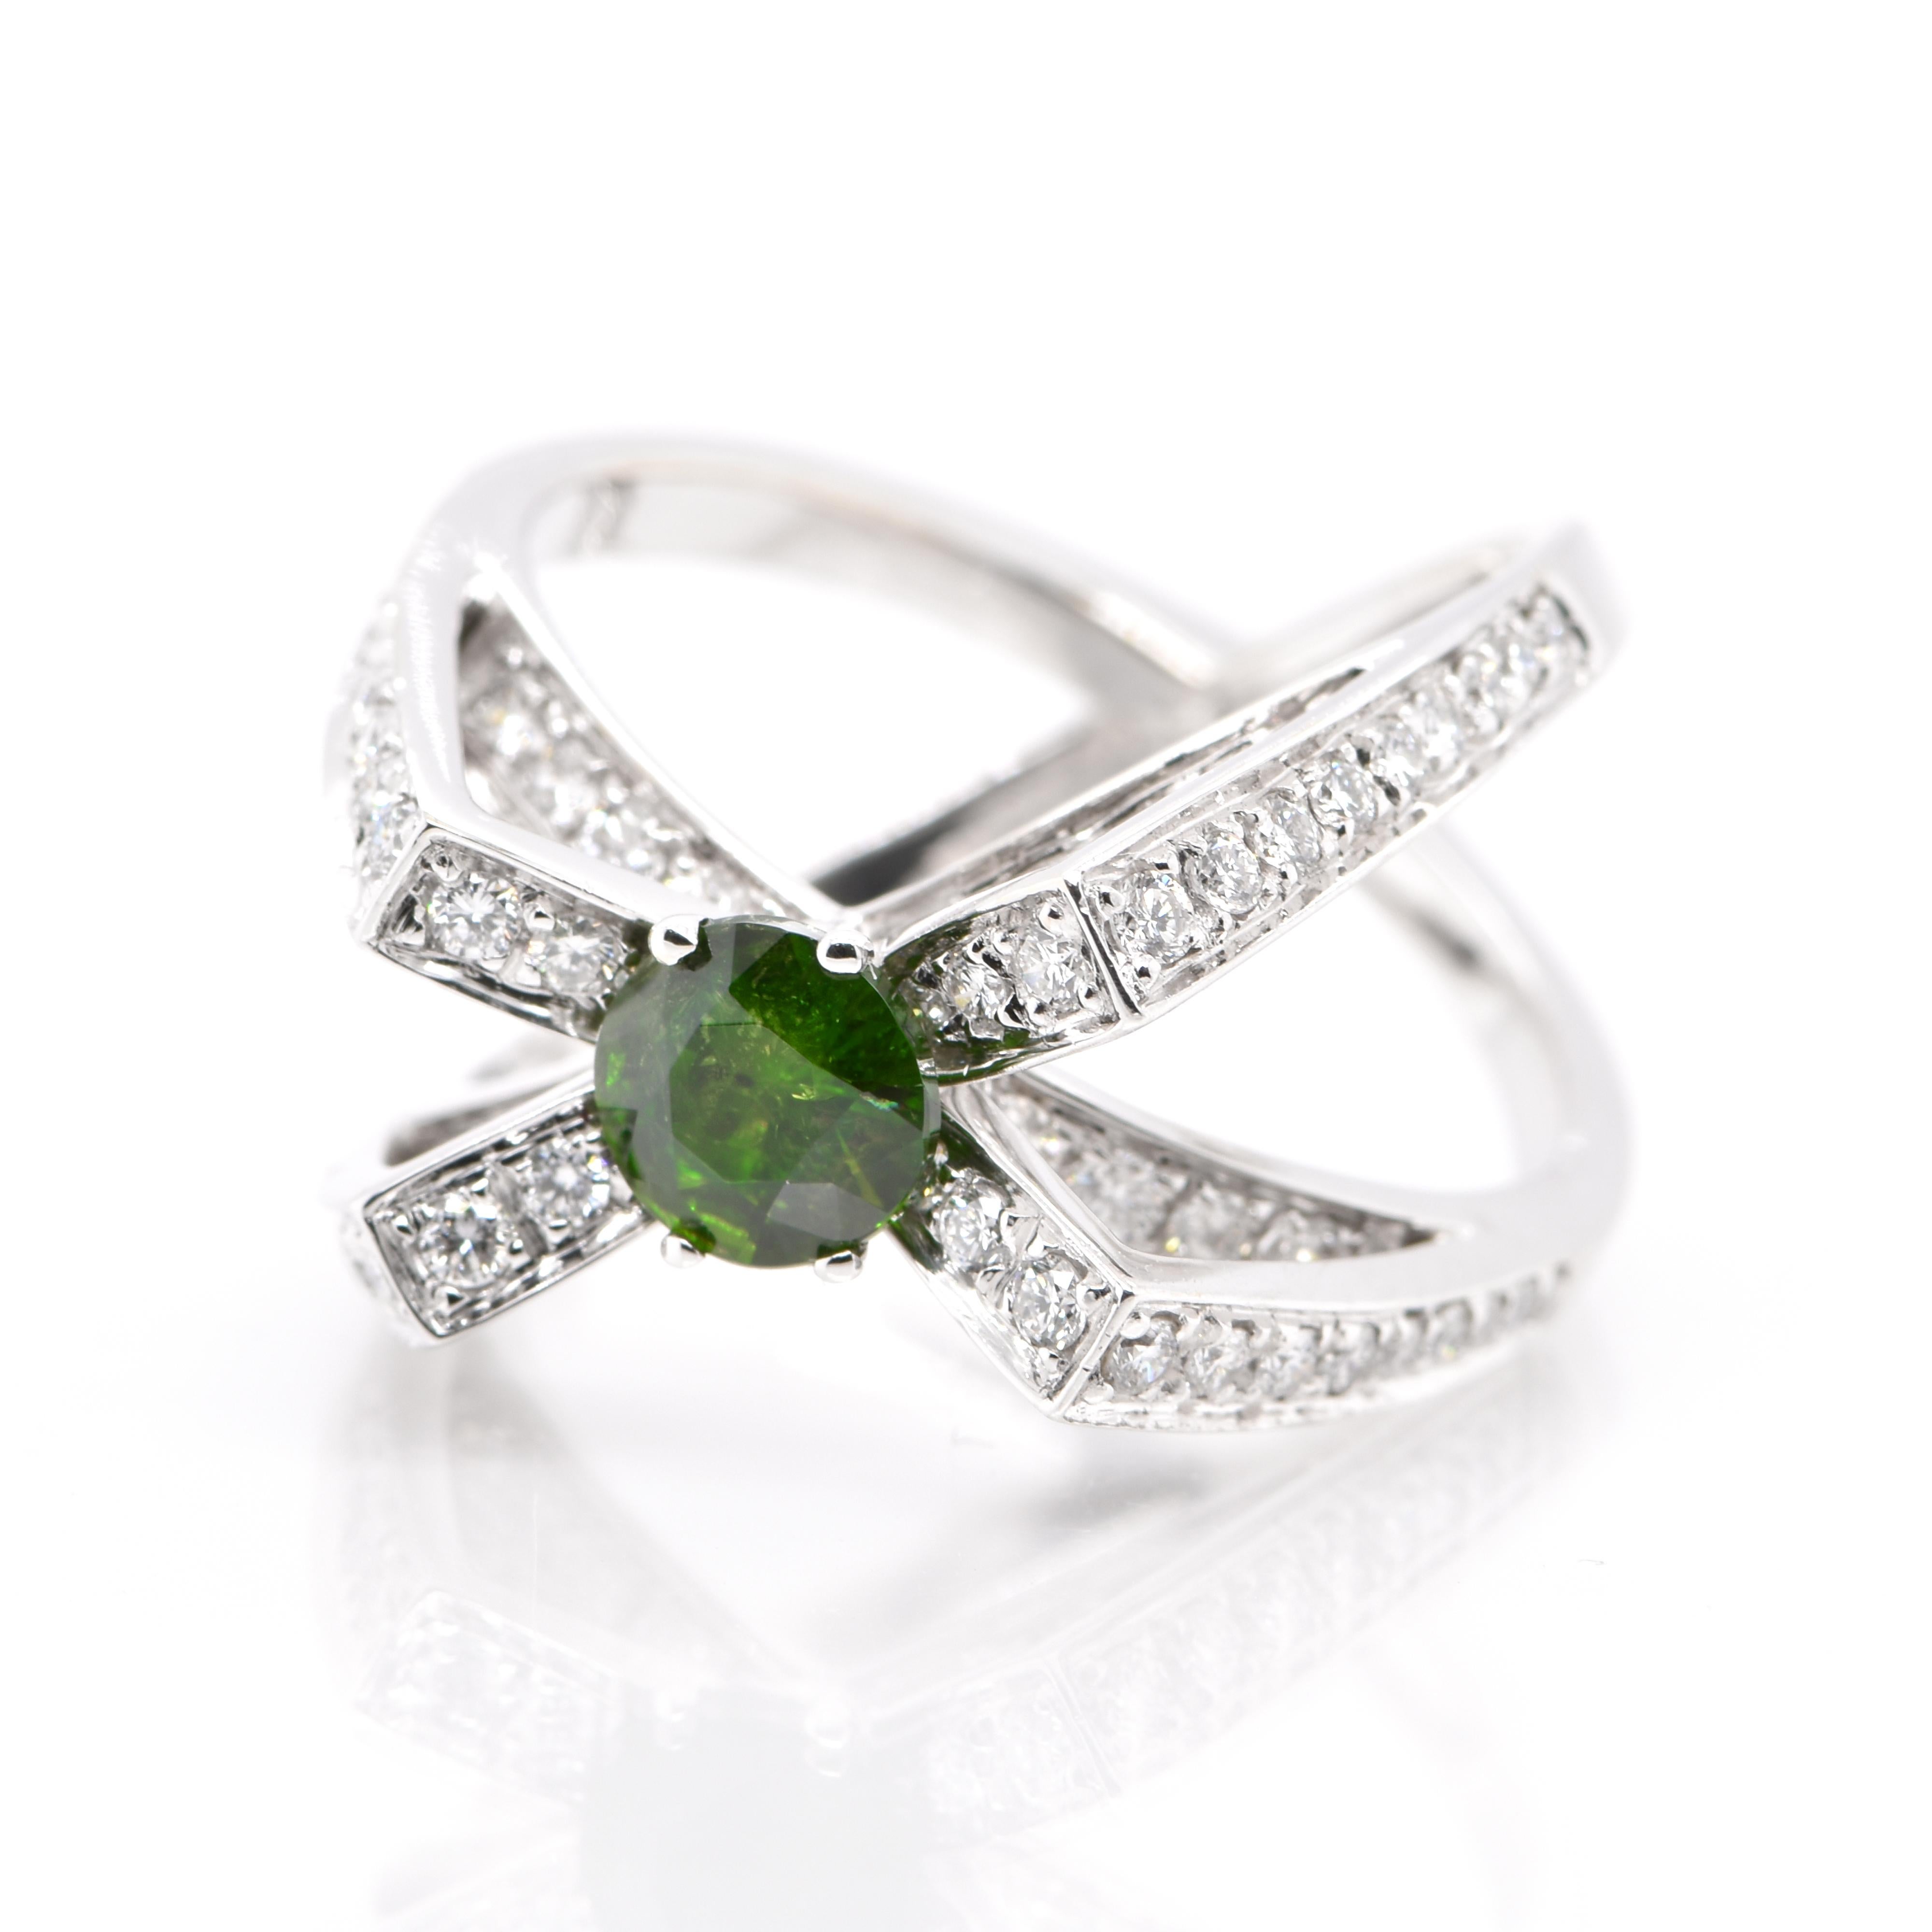 A beautiful Cocktail Ring featuring a 0.92 Carat, Natural Demantoid Garnet and 0.81 Carats of Diamond Accents set in 18 Karat White Gold. Demantoid Garnet's only known source used to be the Ural Mountains in Russia however recent discoveries in